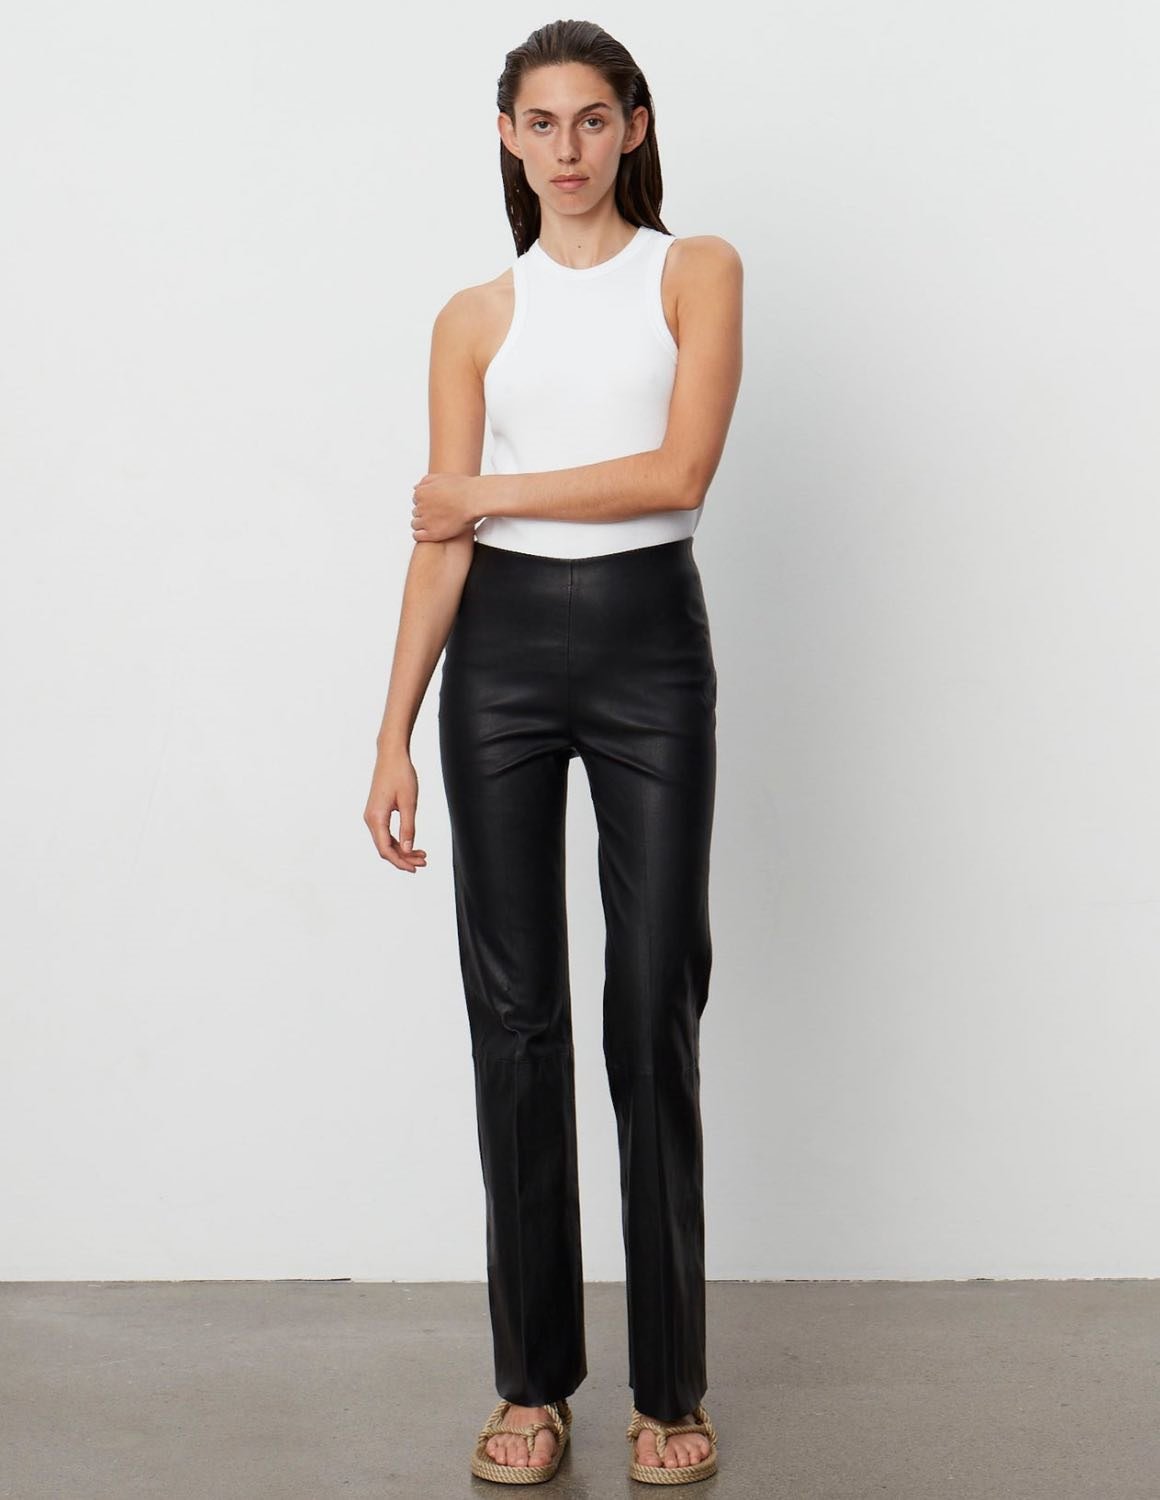 ZARA FAUX LEATHER FLARE PANTS size XS Bloggers Favorite